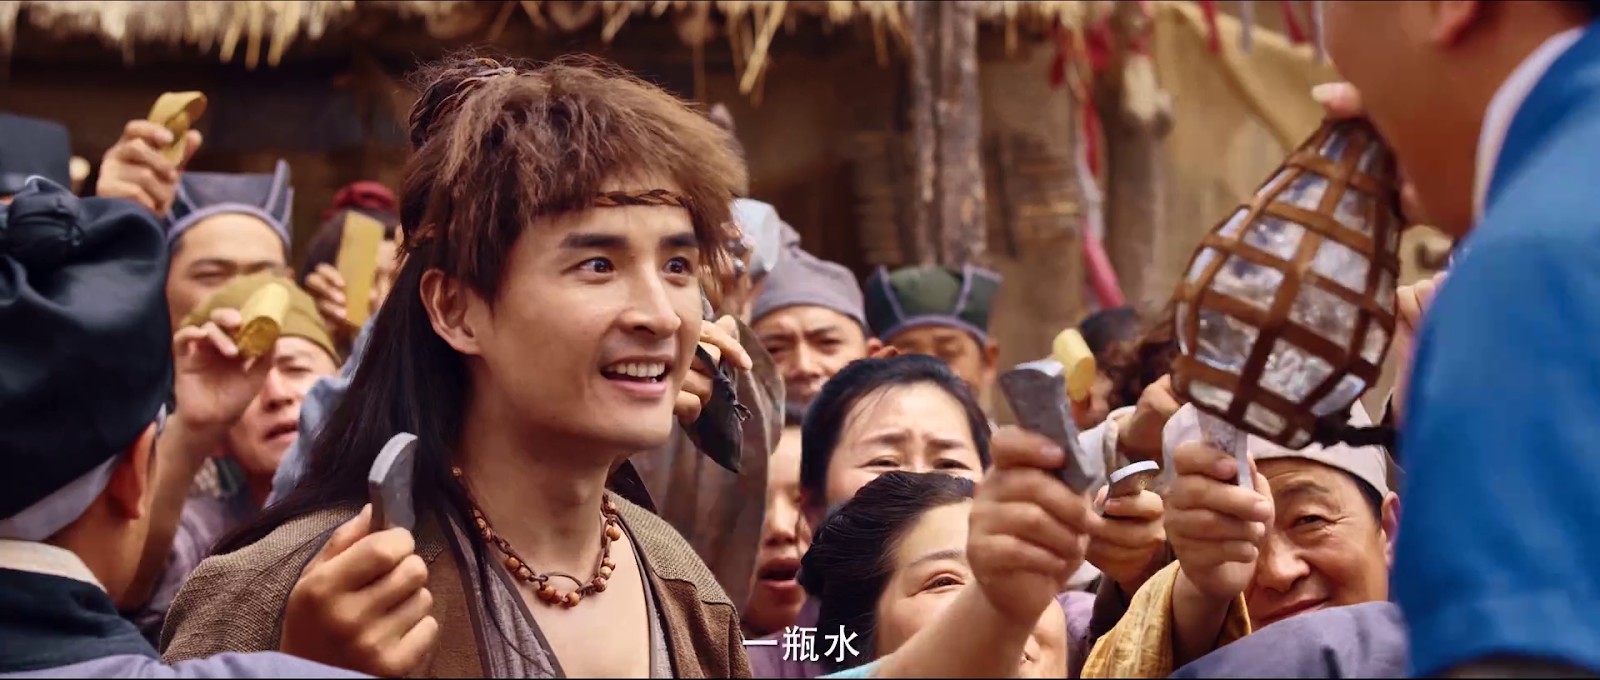 Download Journey to The East (2019) Dual Audio {Hindi-Chinese} High Quality 480p [240MB] || 720p [660MB] || 1080p [1GB]